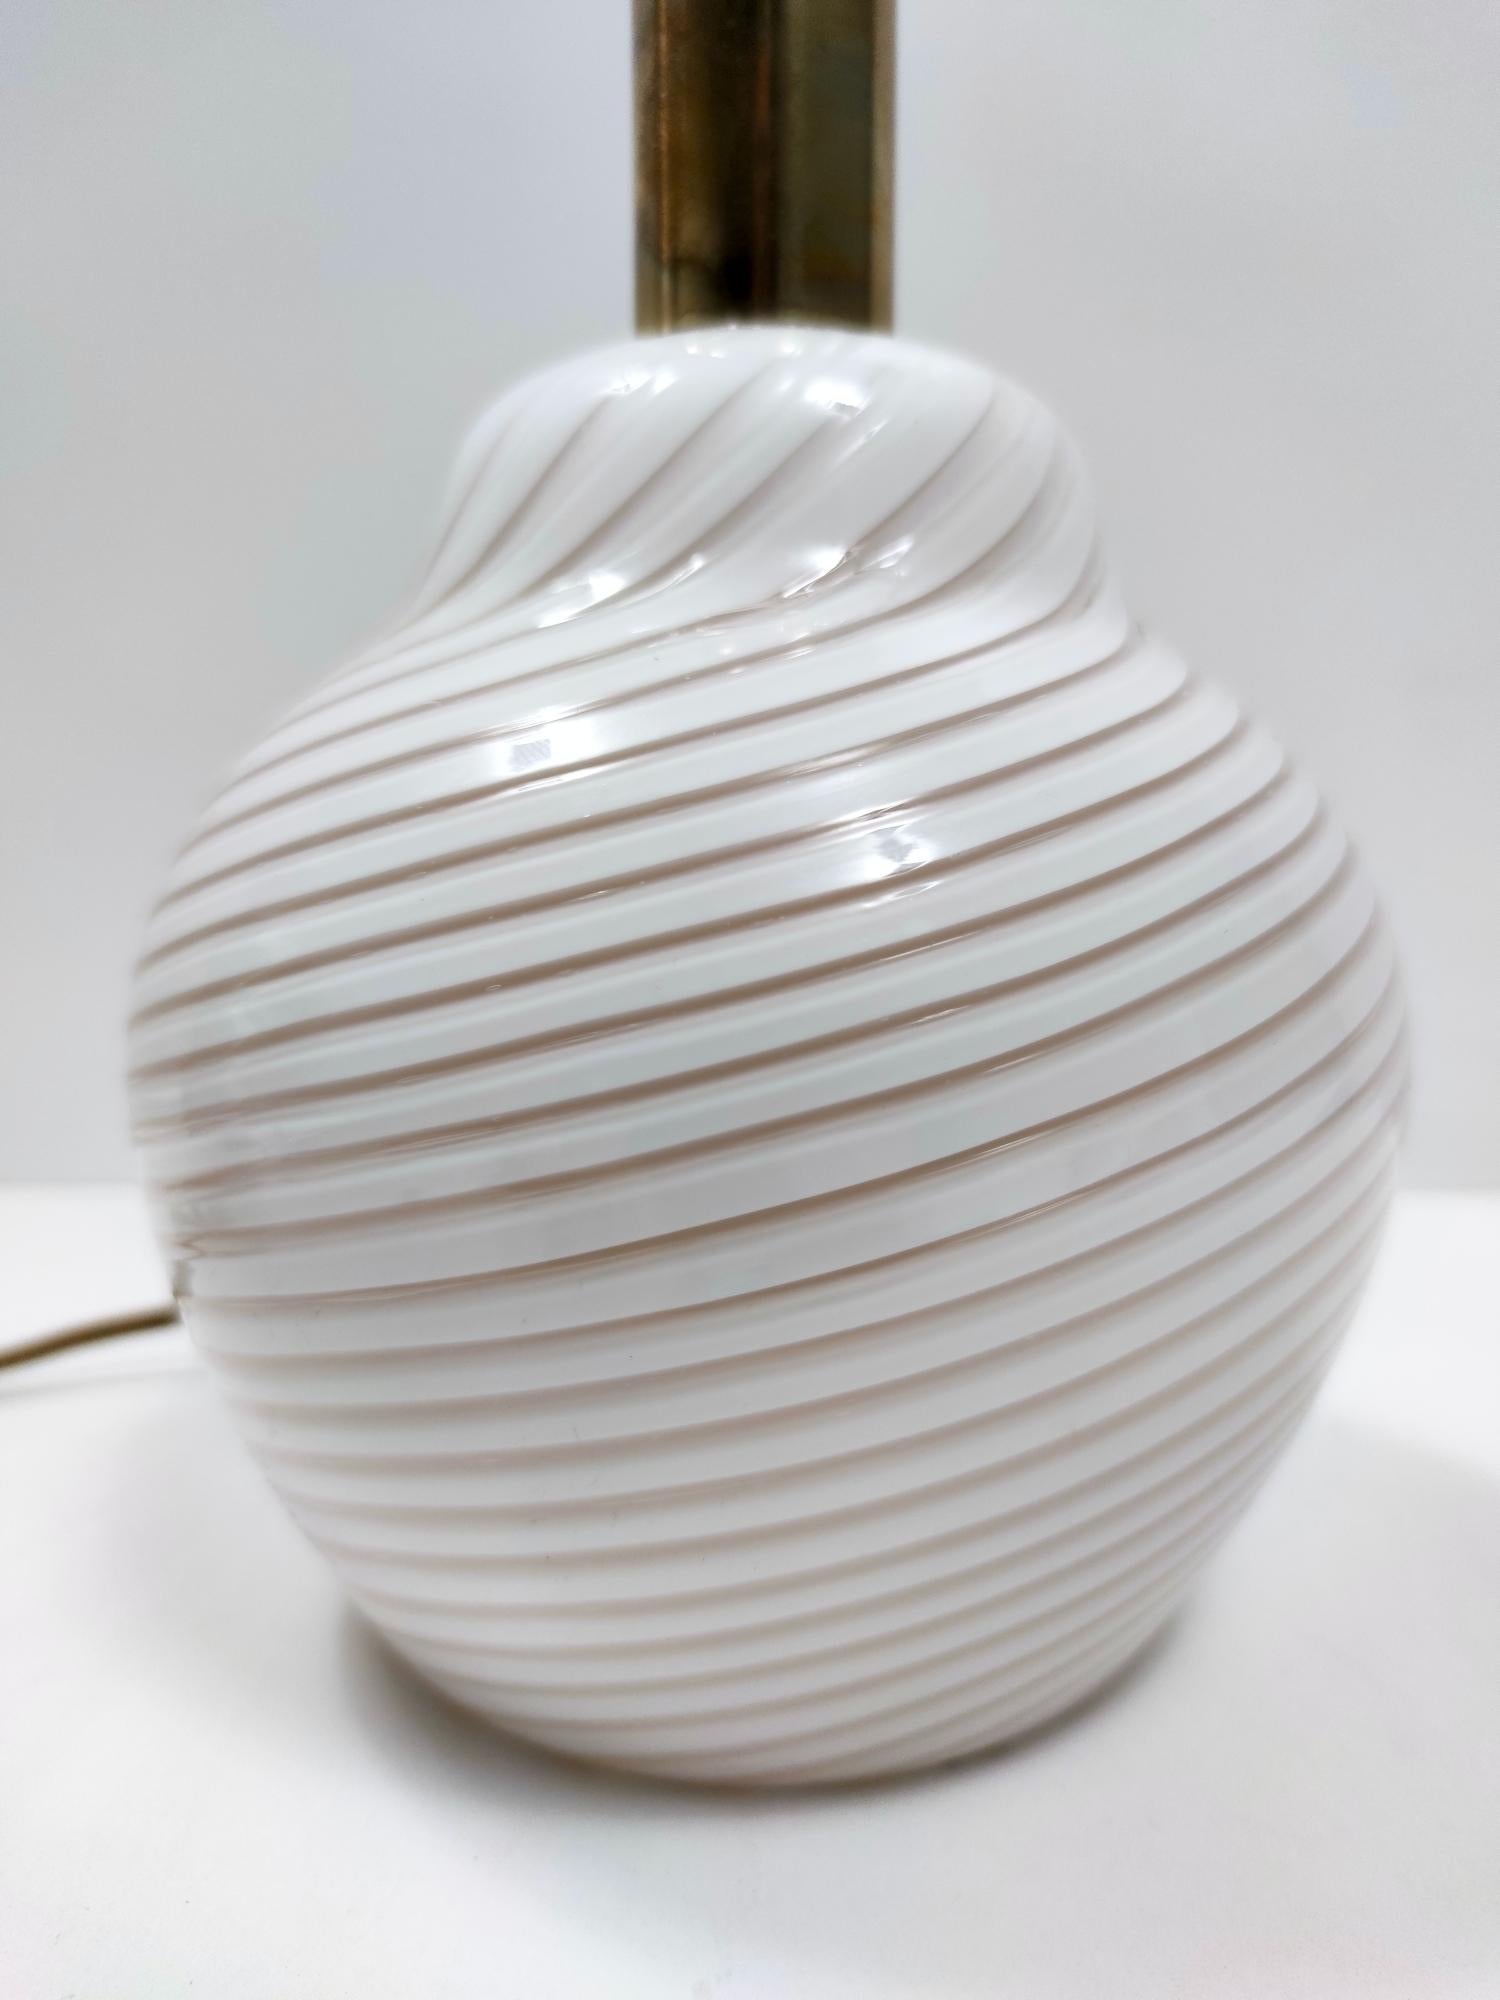 Murano Glass Table Lamp by Lino Tagliapietra Produced by Paf, Italy, 1980s In Excellent Condition For Sale In Bresso, Lombardy